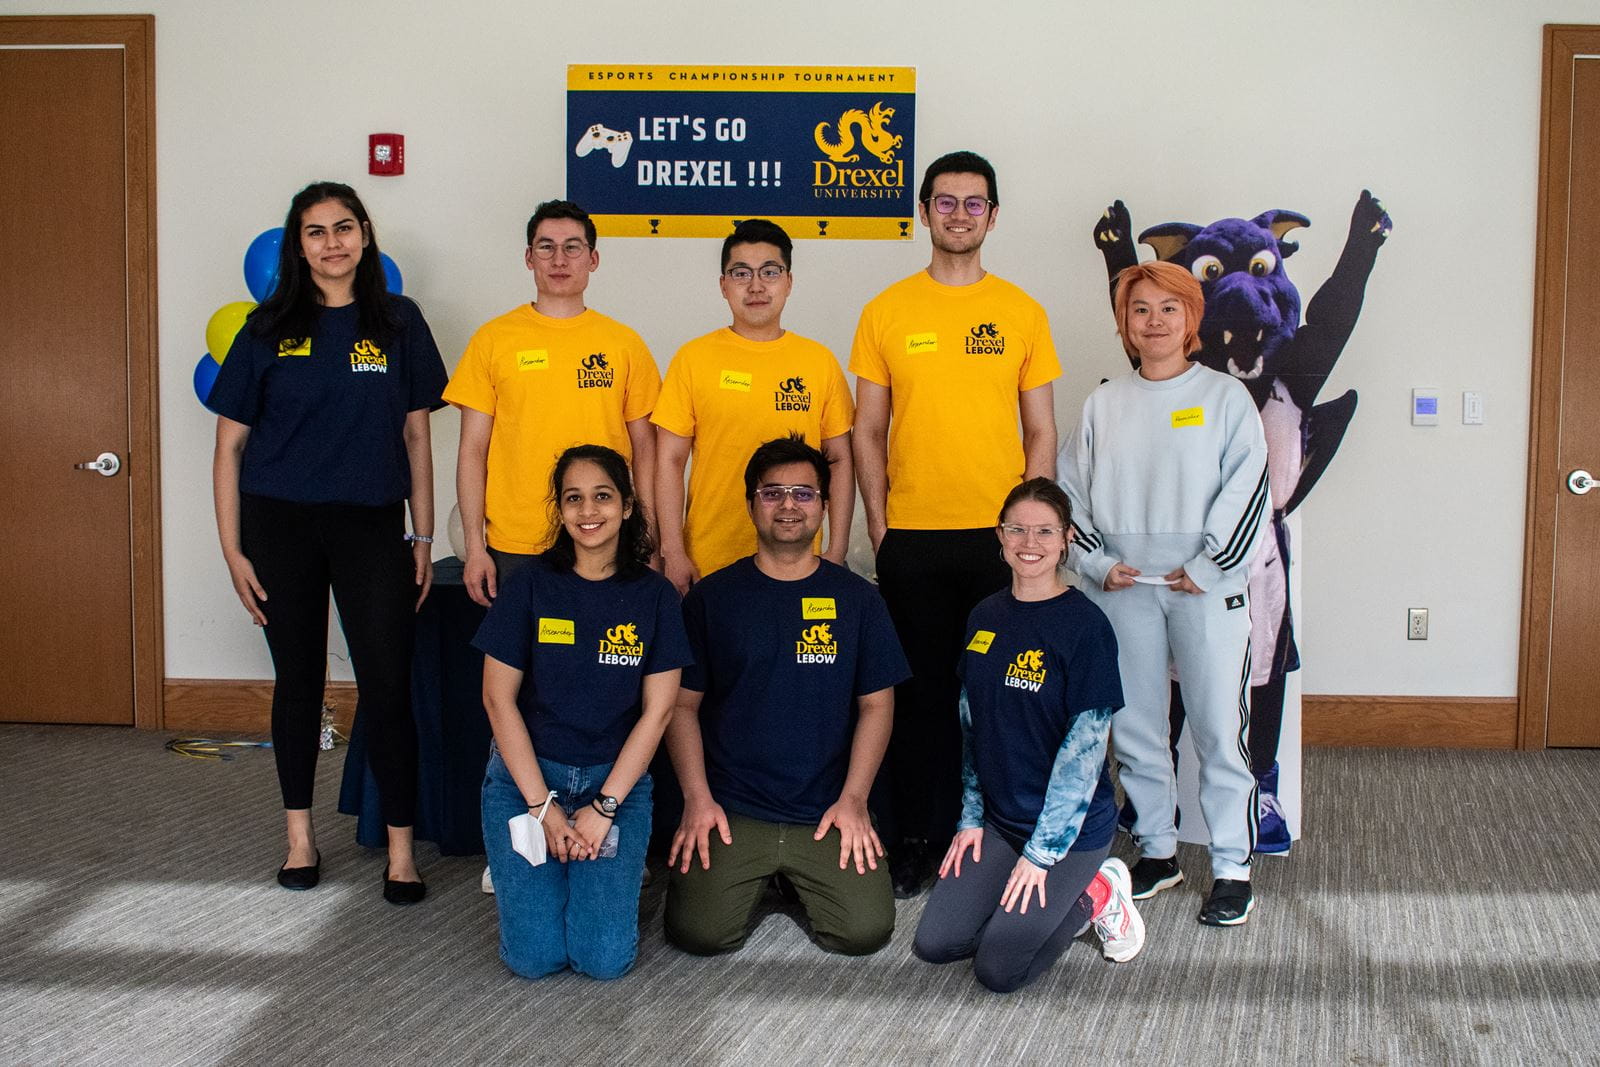 A group of students standing in front of a sign that reads "E-Sports Championship Tournament: Let's go Drexel!!!"